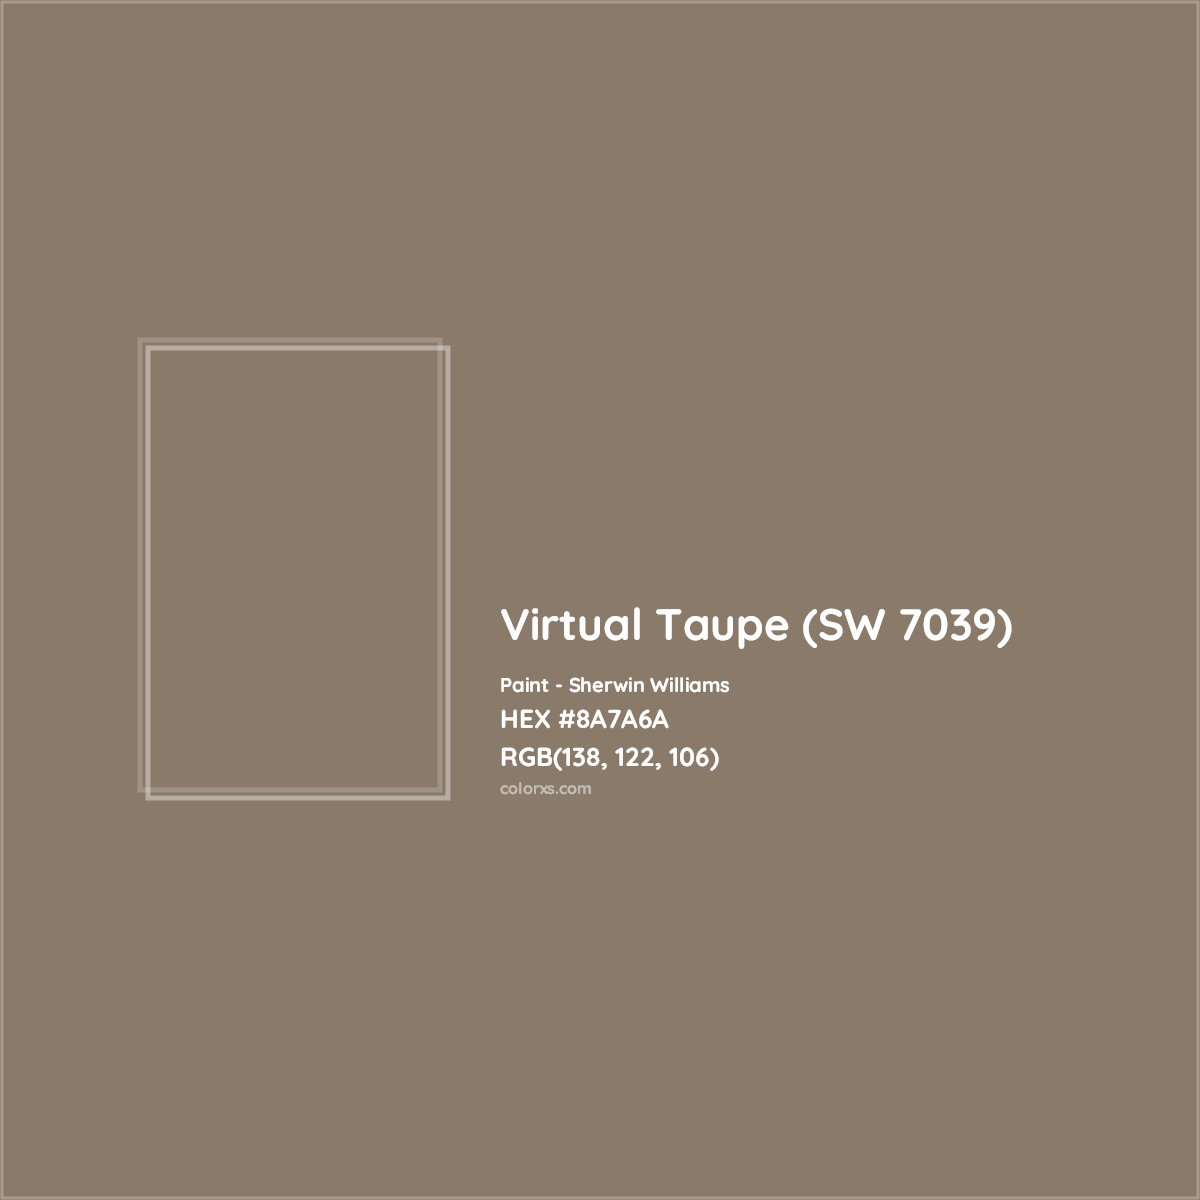 HEX #8A7A6A Virtual Taupe (SW 7039) Paint Sherwin Williams - Color Code